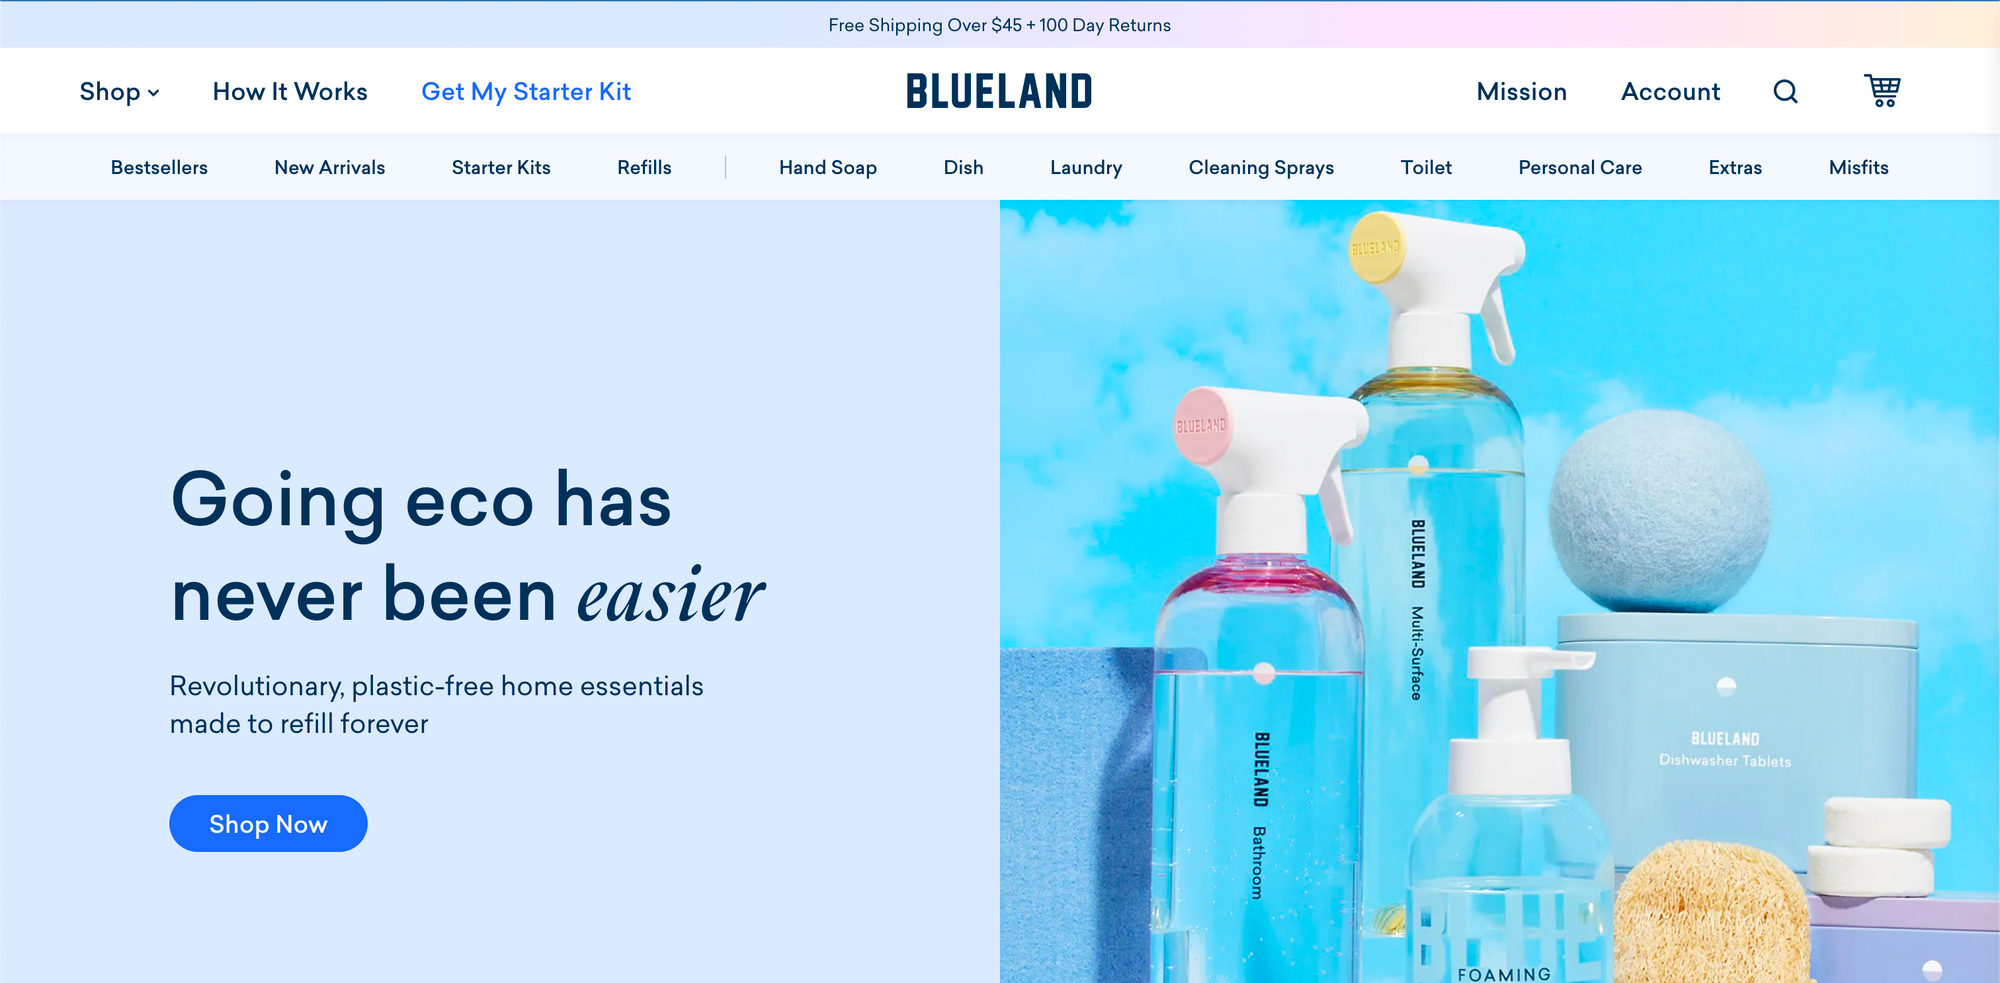 A screenshot of the Blueland website showcasing its cleaning products with the tagline “Going eco has never been easier.”